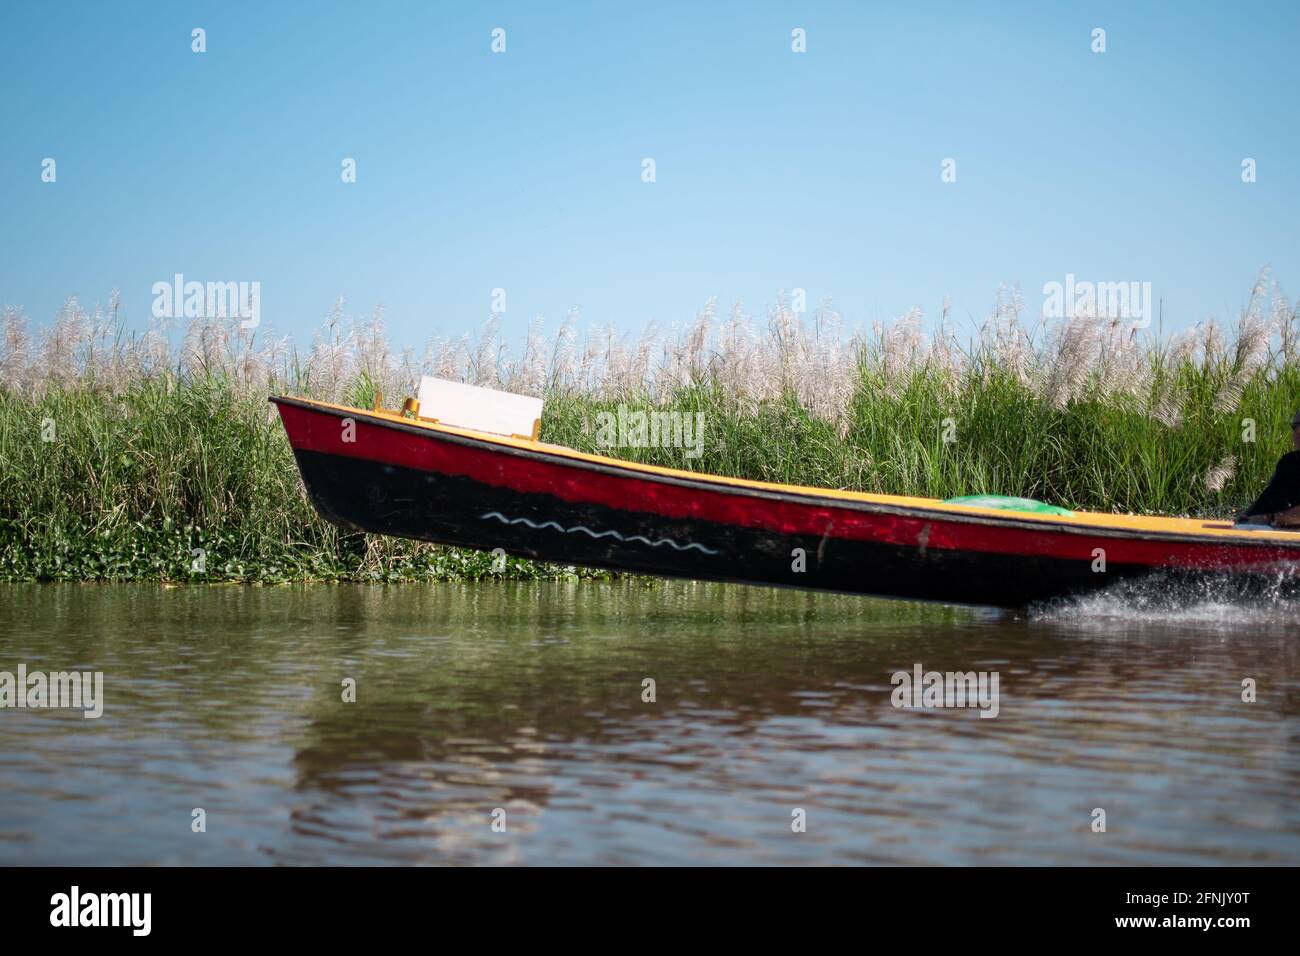 The front of a traditional red and black wooden boat above water level in high speed by the floating gardens of Inle Lake, Nyaung Shwe, Myanmar Stock Photo